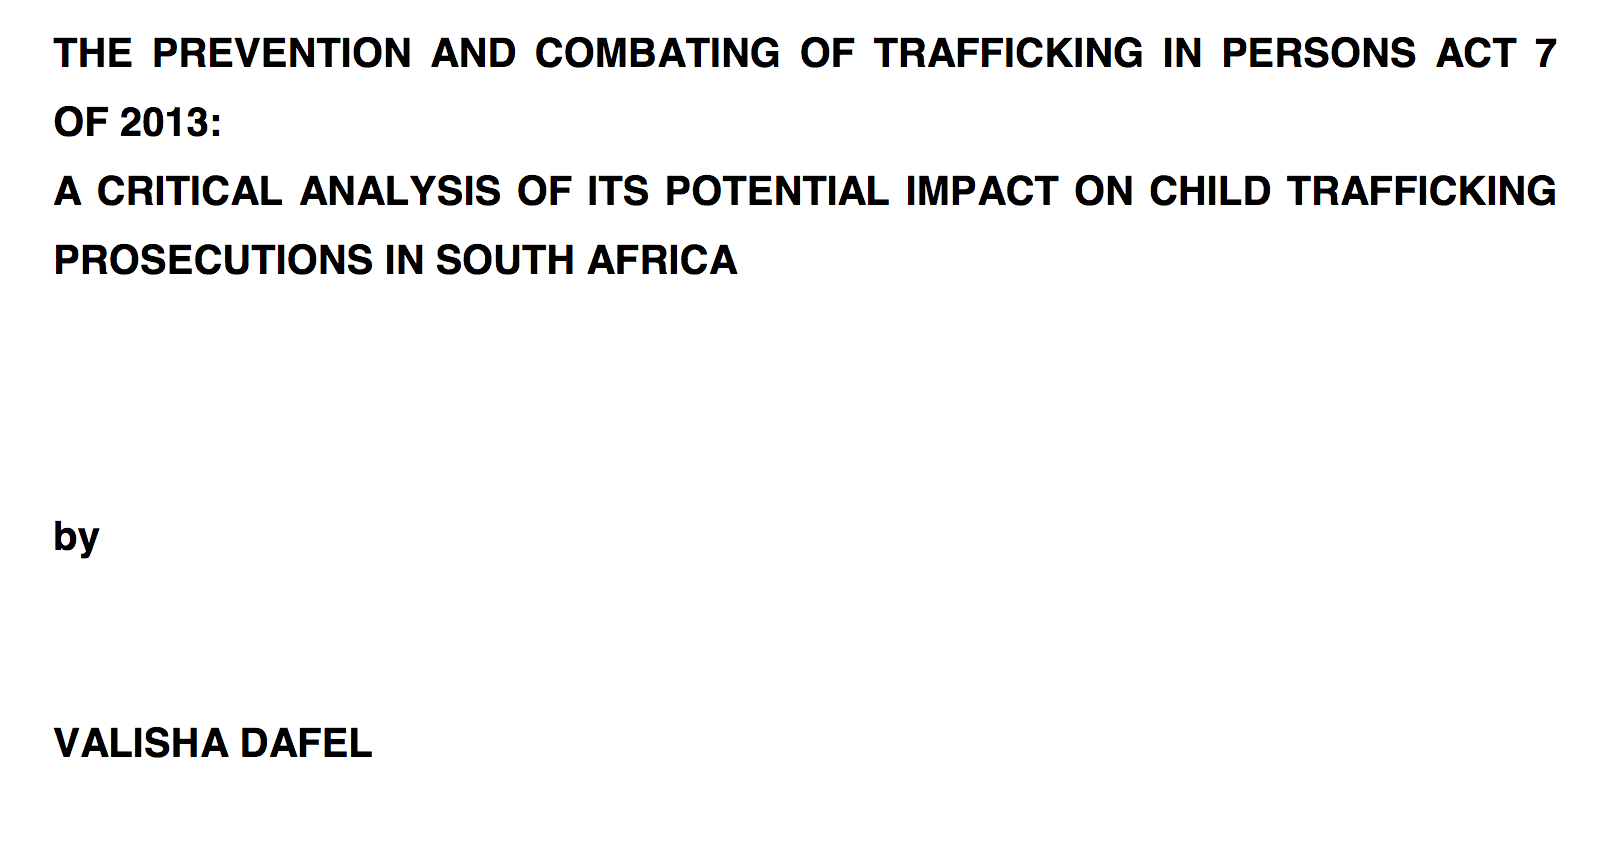 The prevention and combating of trafficking in persons Act 7 of 2013: A critical Analysis of its potential impact on child trafficking prosecutions in South Africa